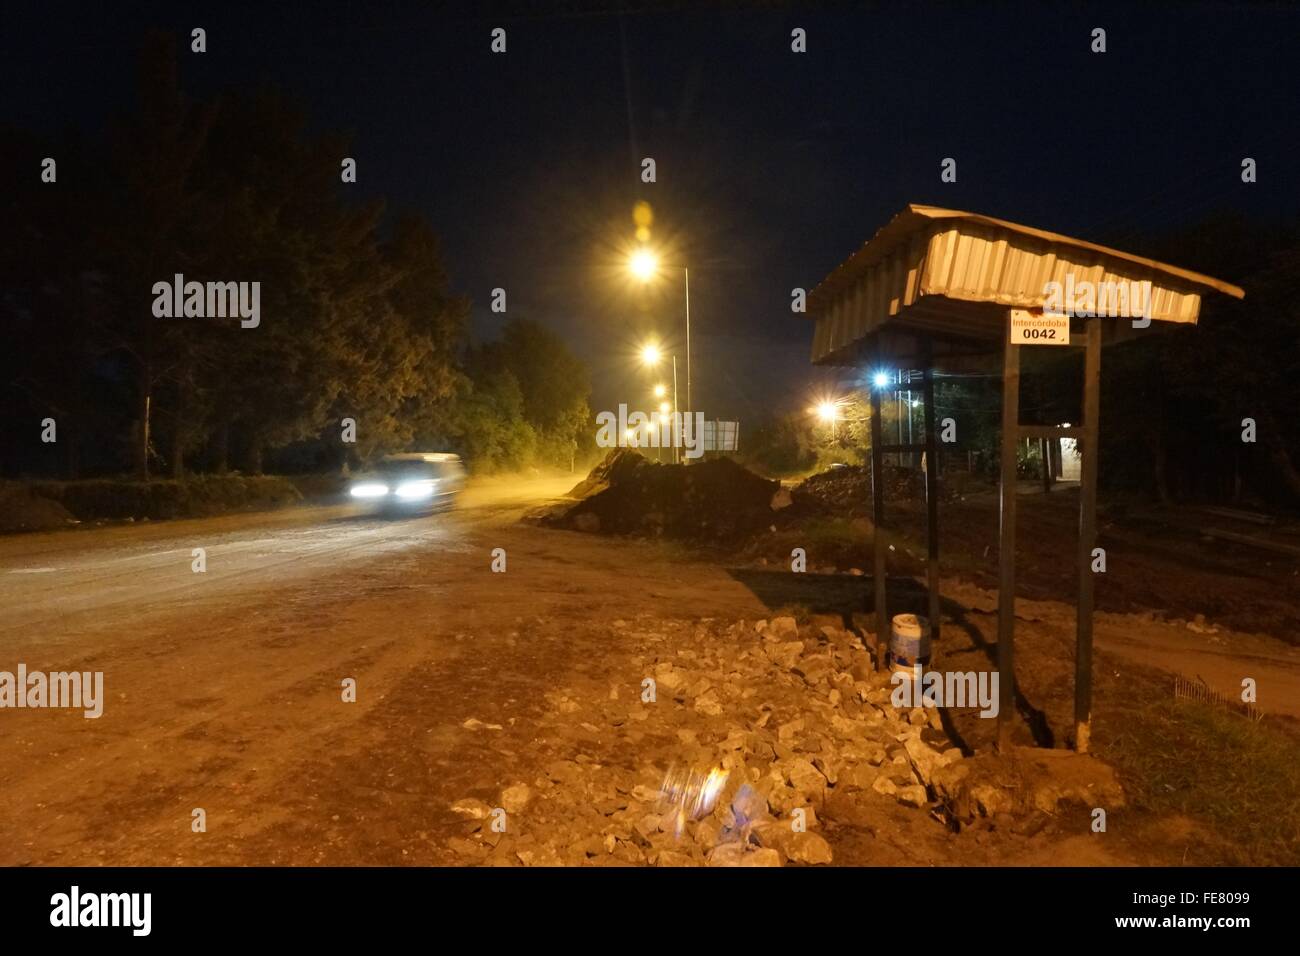 Illuminated Car On Dirt Road Passing By Bus Stop At Night Stock Photo